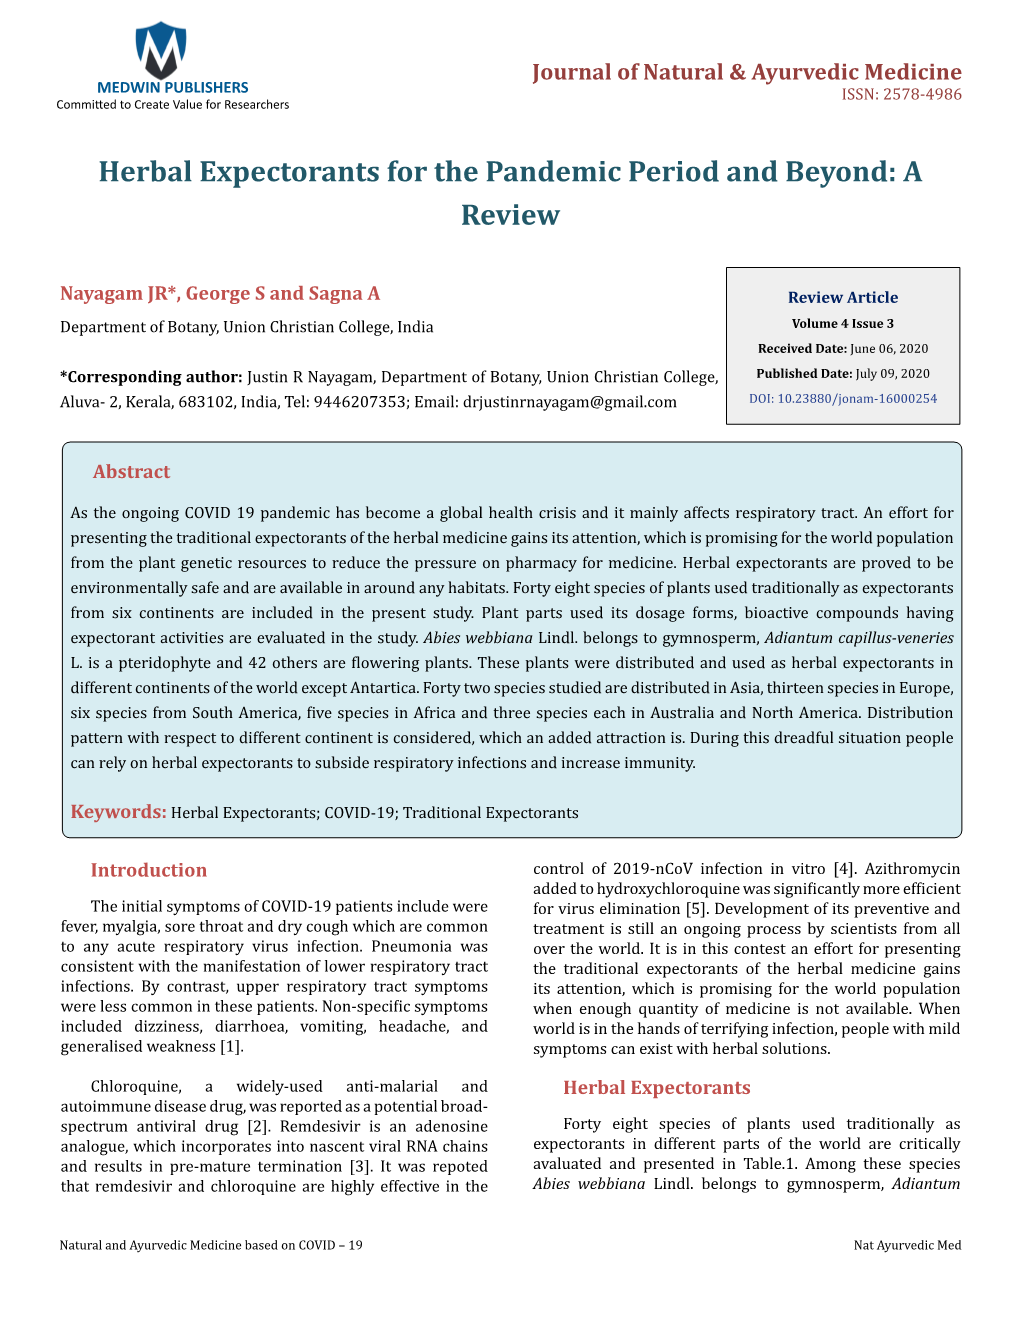 Herbal Expectorants for the Pandemic Period and Beyond: a Review